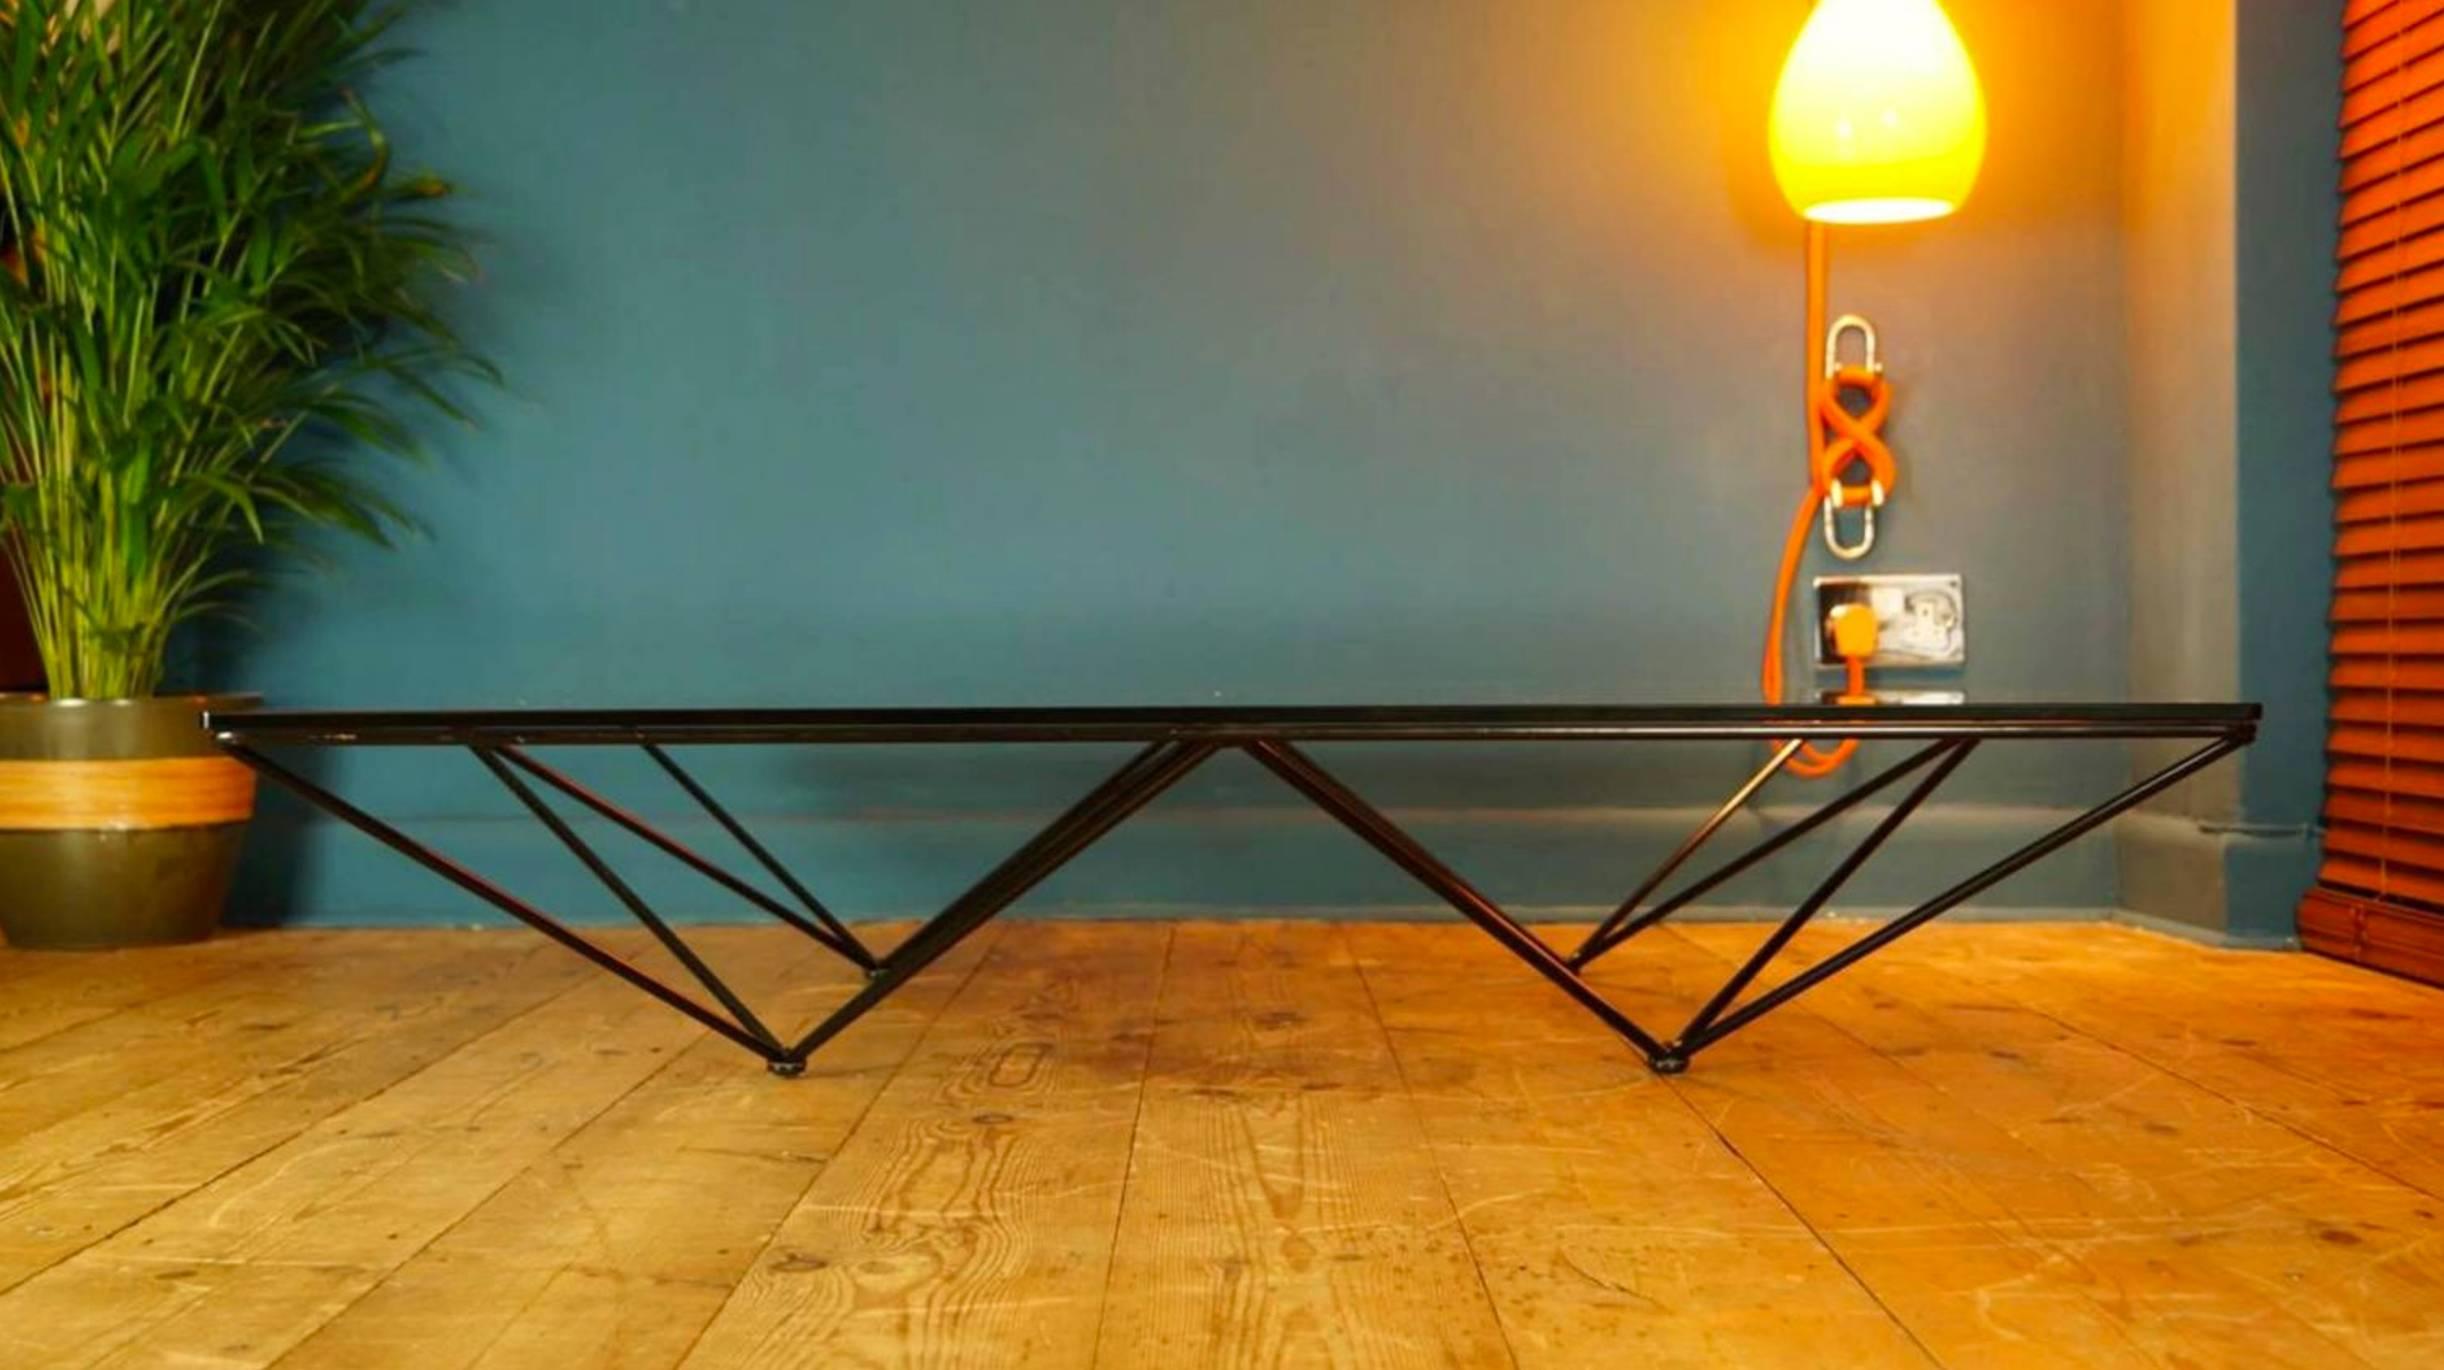 Alanda table designer and manufacturer: Paolo Piva for B&B Italia design: 1980s highly sought after authentic vintage coffee table designed by Paolo Piva for B&B Italia in 1981. Black powder coated steel frame with a very heavy, thick